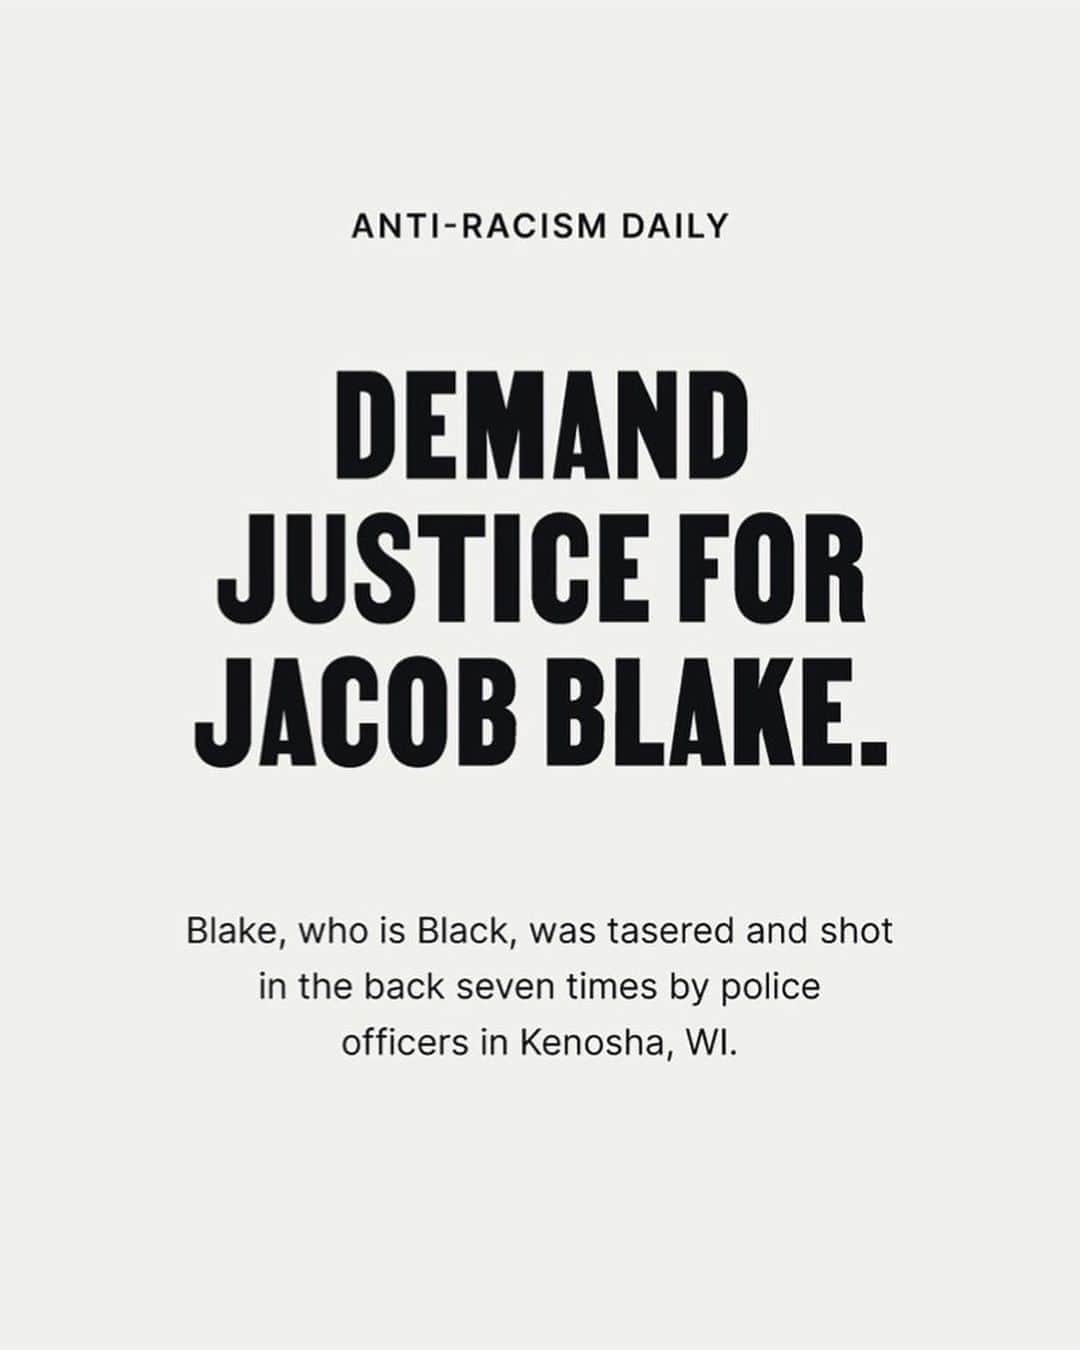 マライア・キャリーさんのインスタグラム写真 - (マライア・キャリーInstagram)「Sick and tired and being sick and tired. Praying for Jacob Blake to make a full recovery. Swipe through to see actions to take now to demand justice via @antiracistdaily. We want change now #BlackLivesMatter #SayTheirNames  Repost from @antiracismdaily • Update: A GoFundMe has also been set up for Jacob and his family. Please support (link in bio, too):  https://www.gofundme.com/f/justiceforjacobblake  On Sunday, August 23, a Black man was shot in the back seven times by police officers in Kenosha, WI. Reports indicate that the police were on the scene to respond to a domestic dispute, and the victim was attempting to help settle it (Kenosha News). A video of the shooting was widely circulated on social media. In the video, the victim can be seen walking to his car and opening the door before being restrained by a police officer and shot point-blank in the back. A reporter for WISN, a news channel in Wisconsin, later confirmed that the victim is 29-year-old Jacob Blake (Twitter). A large group of people was present to witness the shooting, in addition to his fiancée and children. As of the time of writing this, Blake is in serious condition.⁣⁣ ⁣⁣ Call local officials to demand the police officers are held accountable:⁣⁣ ⁣⁣ Kenosha City Attorney⁣⁣ 262-653-4170⁣⁣ Kenosha Mayor and City Administration: 262-653-4000⁣⁣ Kenosha Police Non Emergency Line 262-656-1234⁣⁣ Wisconsin DOJ ⁣⁣ (608) 266-1221⁣⁣ ⁣ Donate to the Milwaukee Freedom Fund, which is extending support to protestors in Kenosha: https://bit.ly/mkefreedomfund⁣  This story is still developing.  #justiceforjacobblake #jacobblake #kenosha」8月27日 12時57分 - mariahcarey